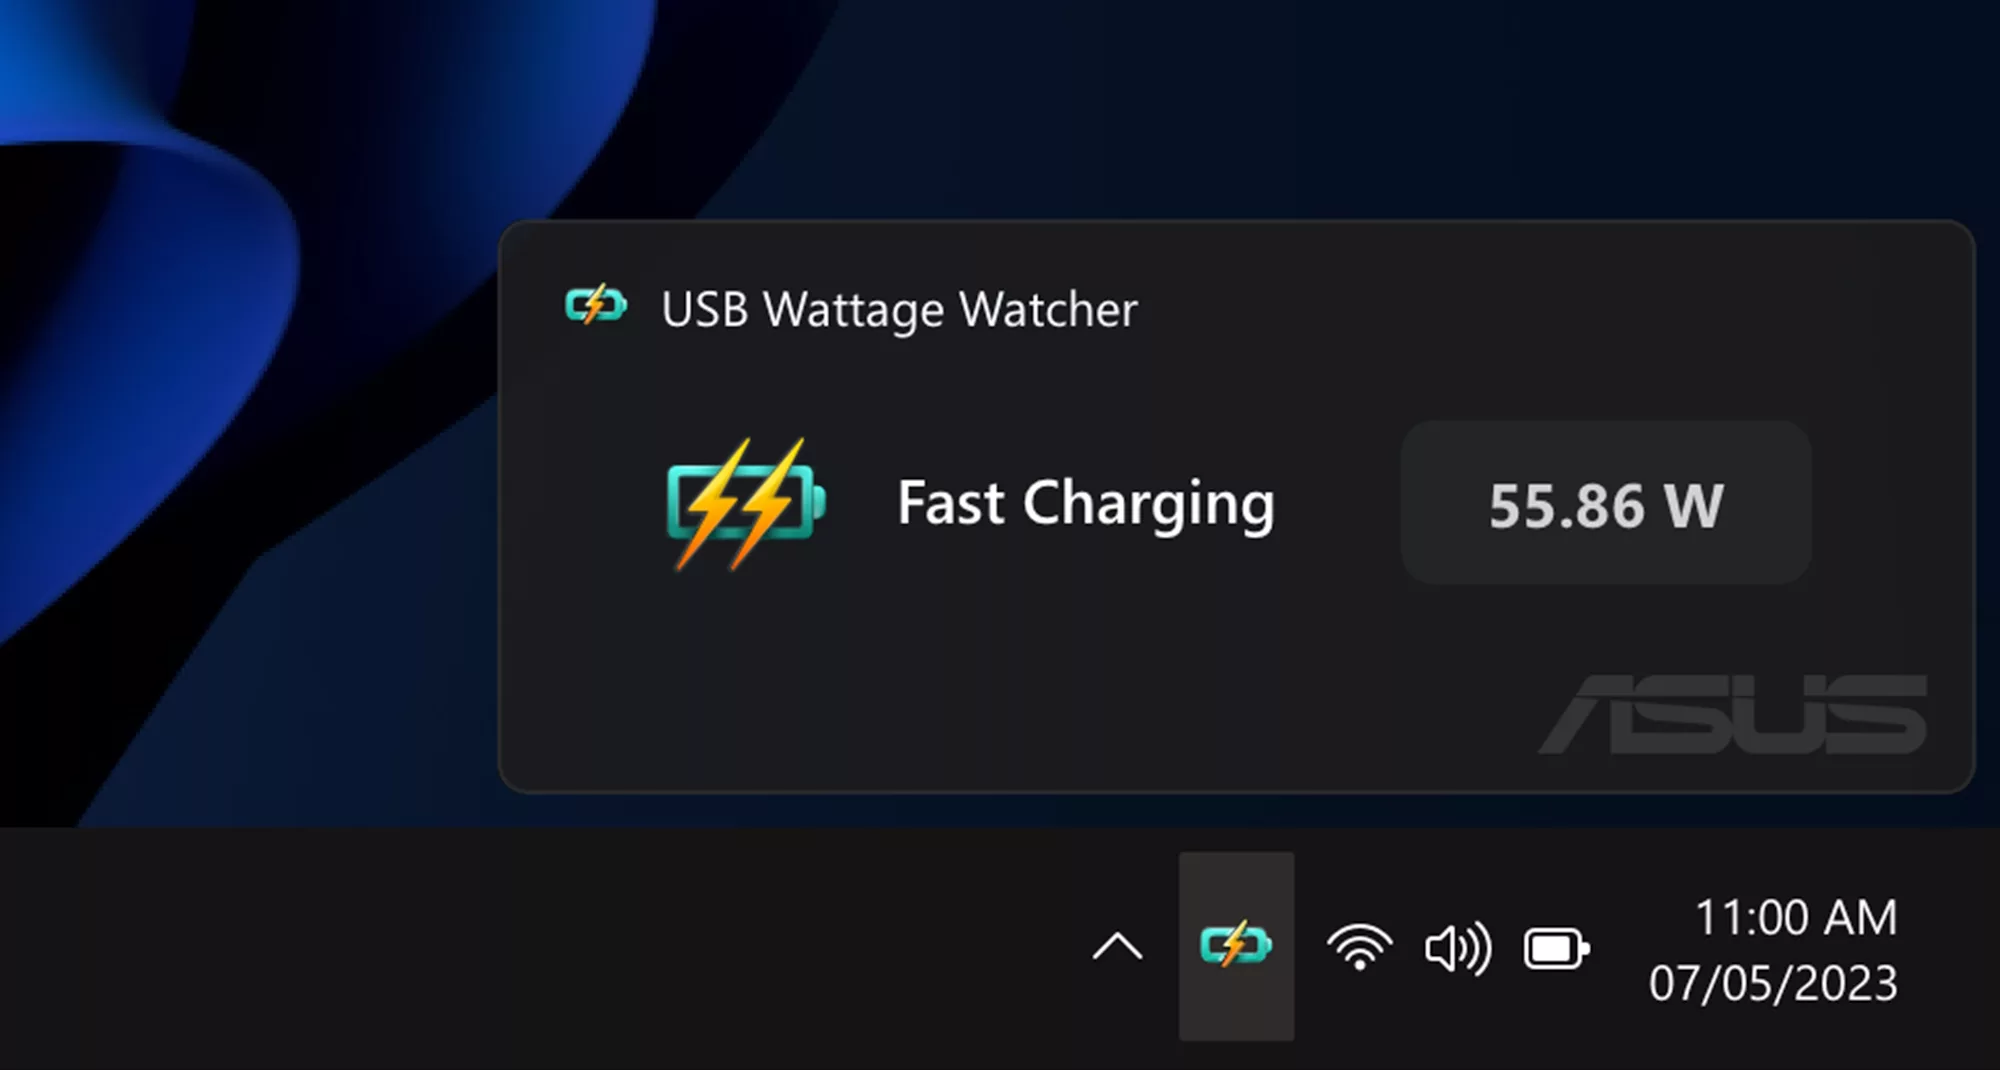 ROG MB_USB Wattage Watcher notification showing that a device is using Fast Charging at 55.86 W